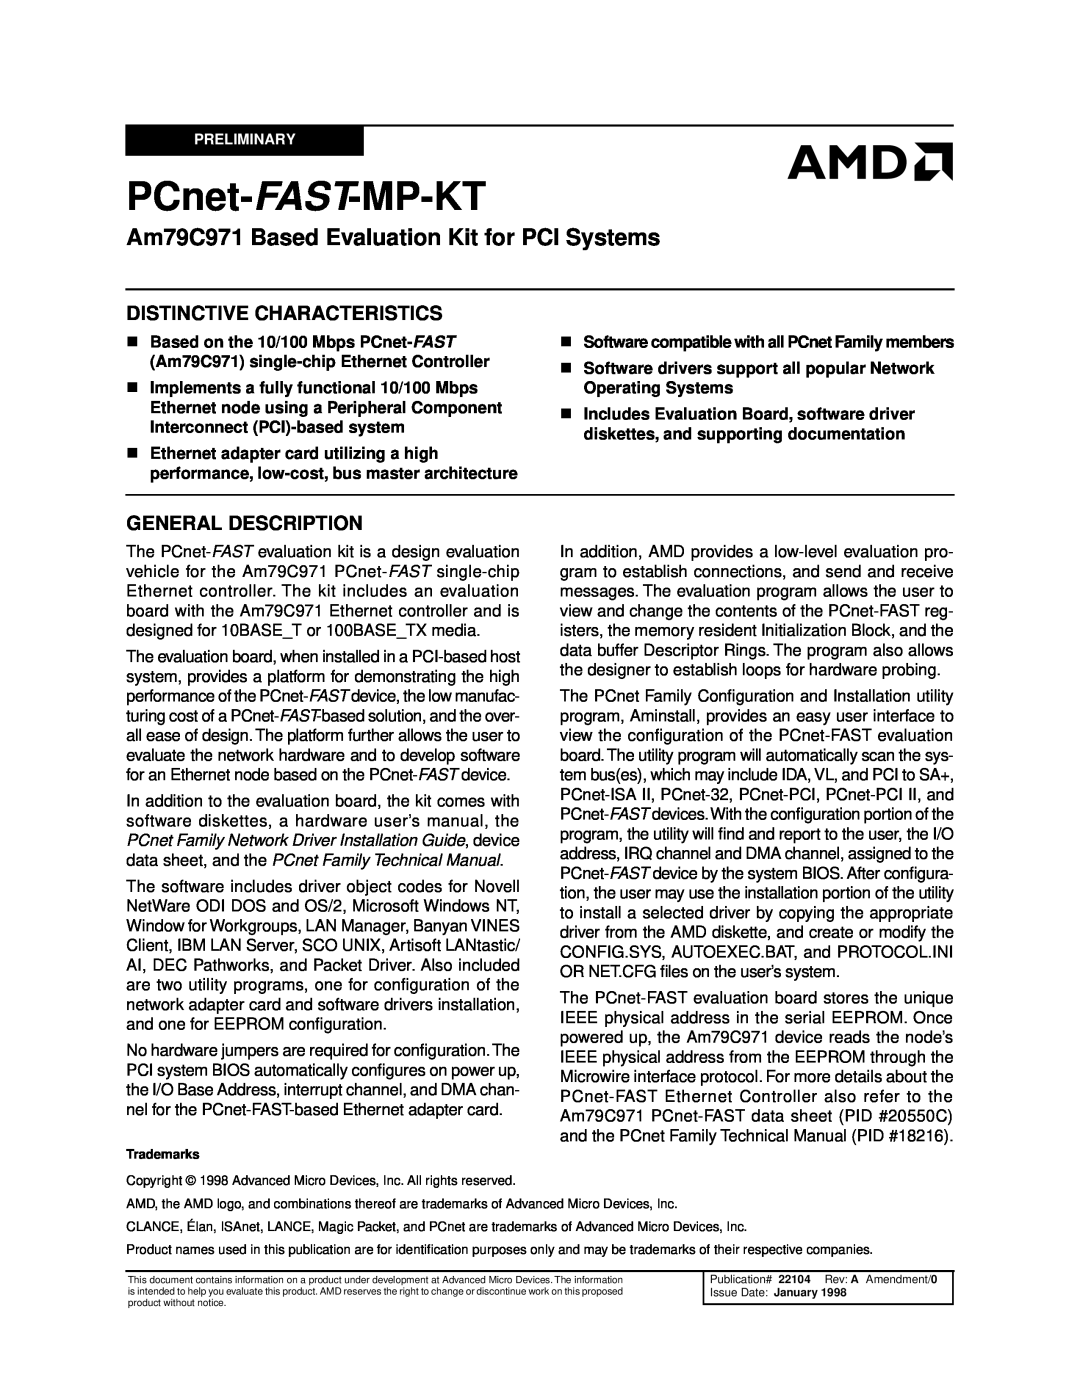 AMD AM79C971 technical manual PCnet-FAST-MP-KT, Am79C971 Based Evaluation Kit for PCI Systems, Distinctive Characteristics 